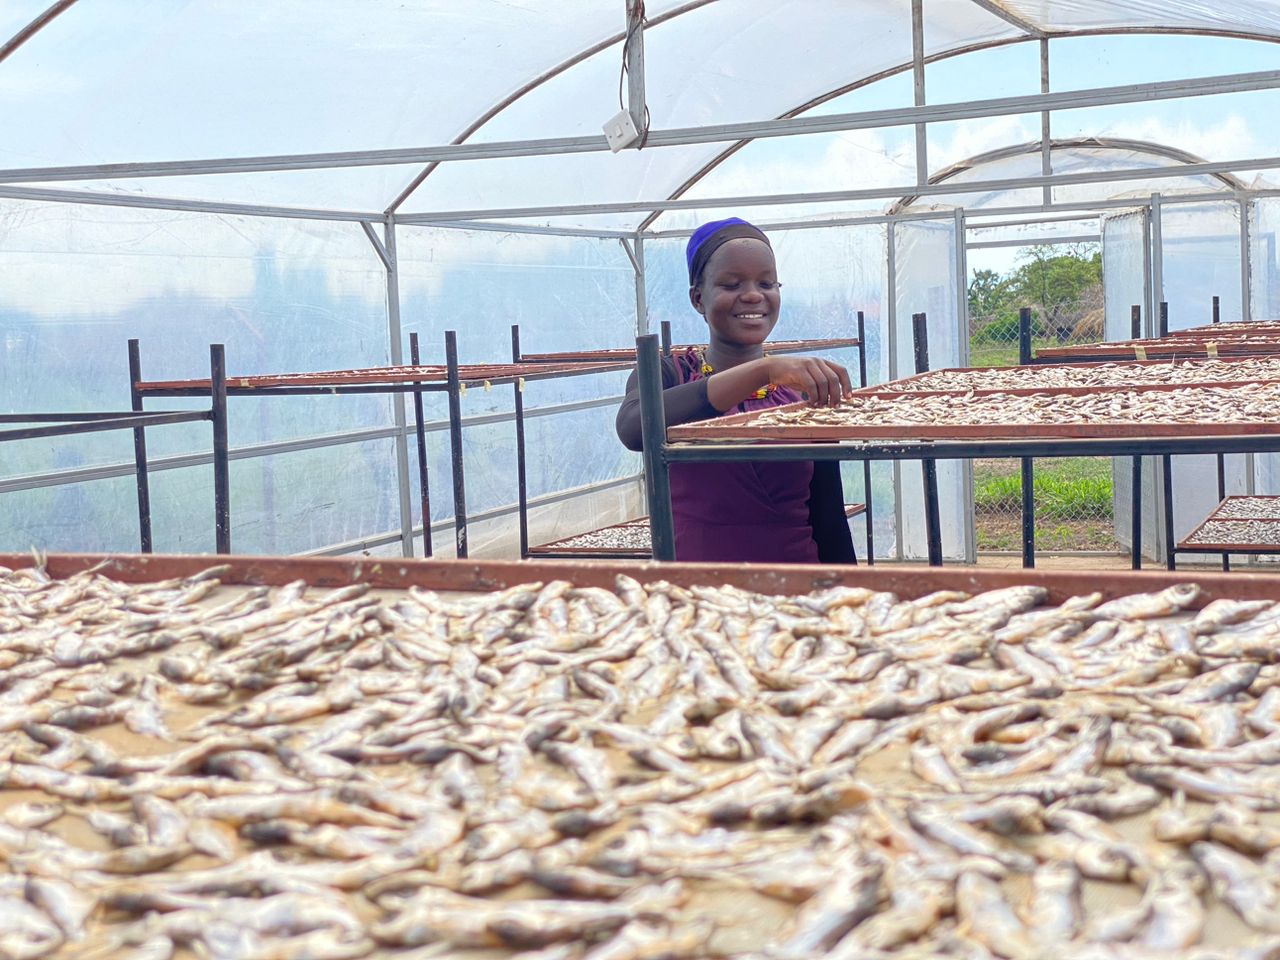 Woman smiling displaying trays of dried fish in tent drier